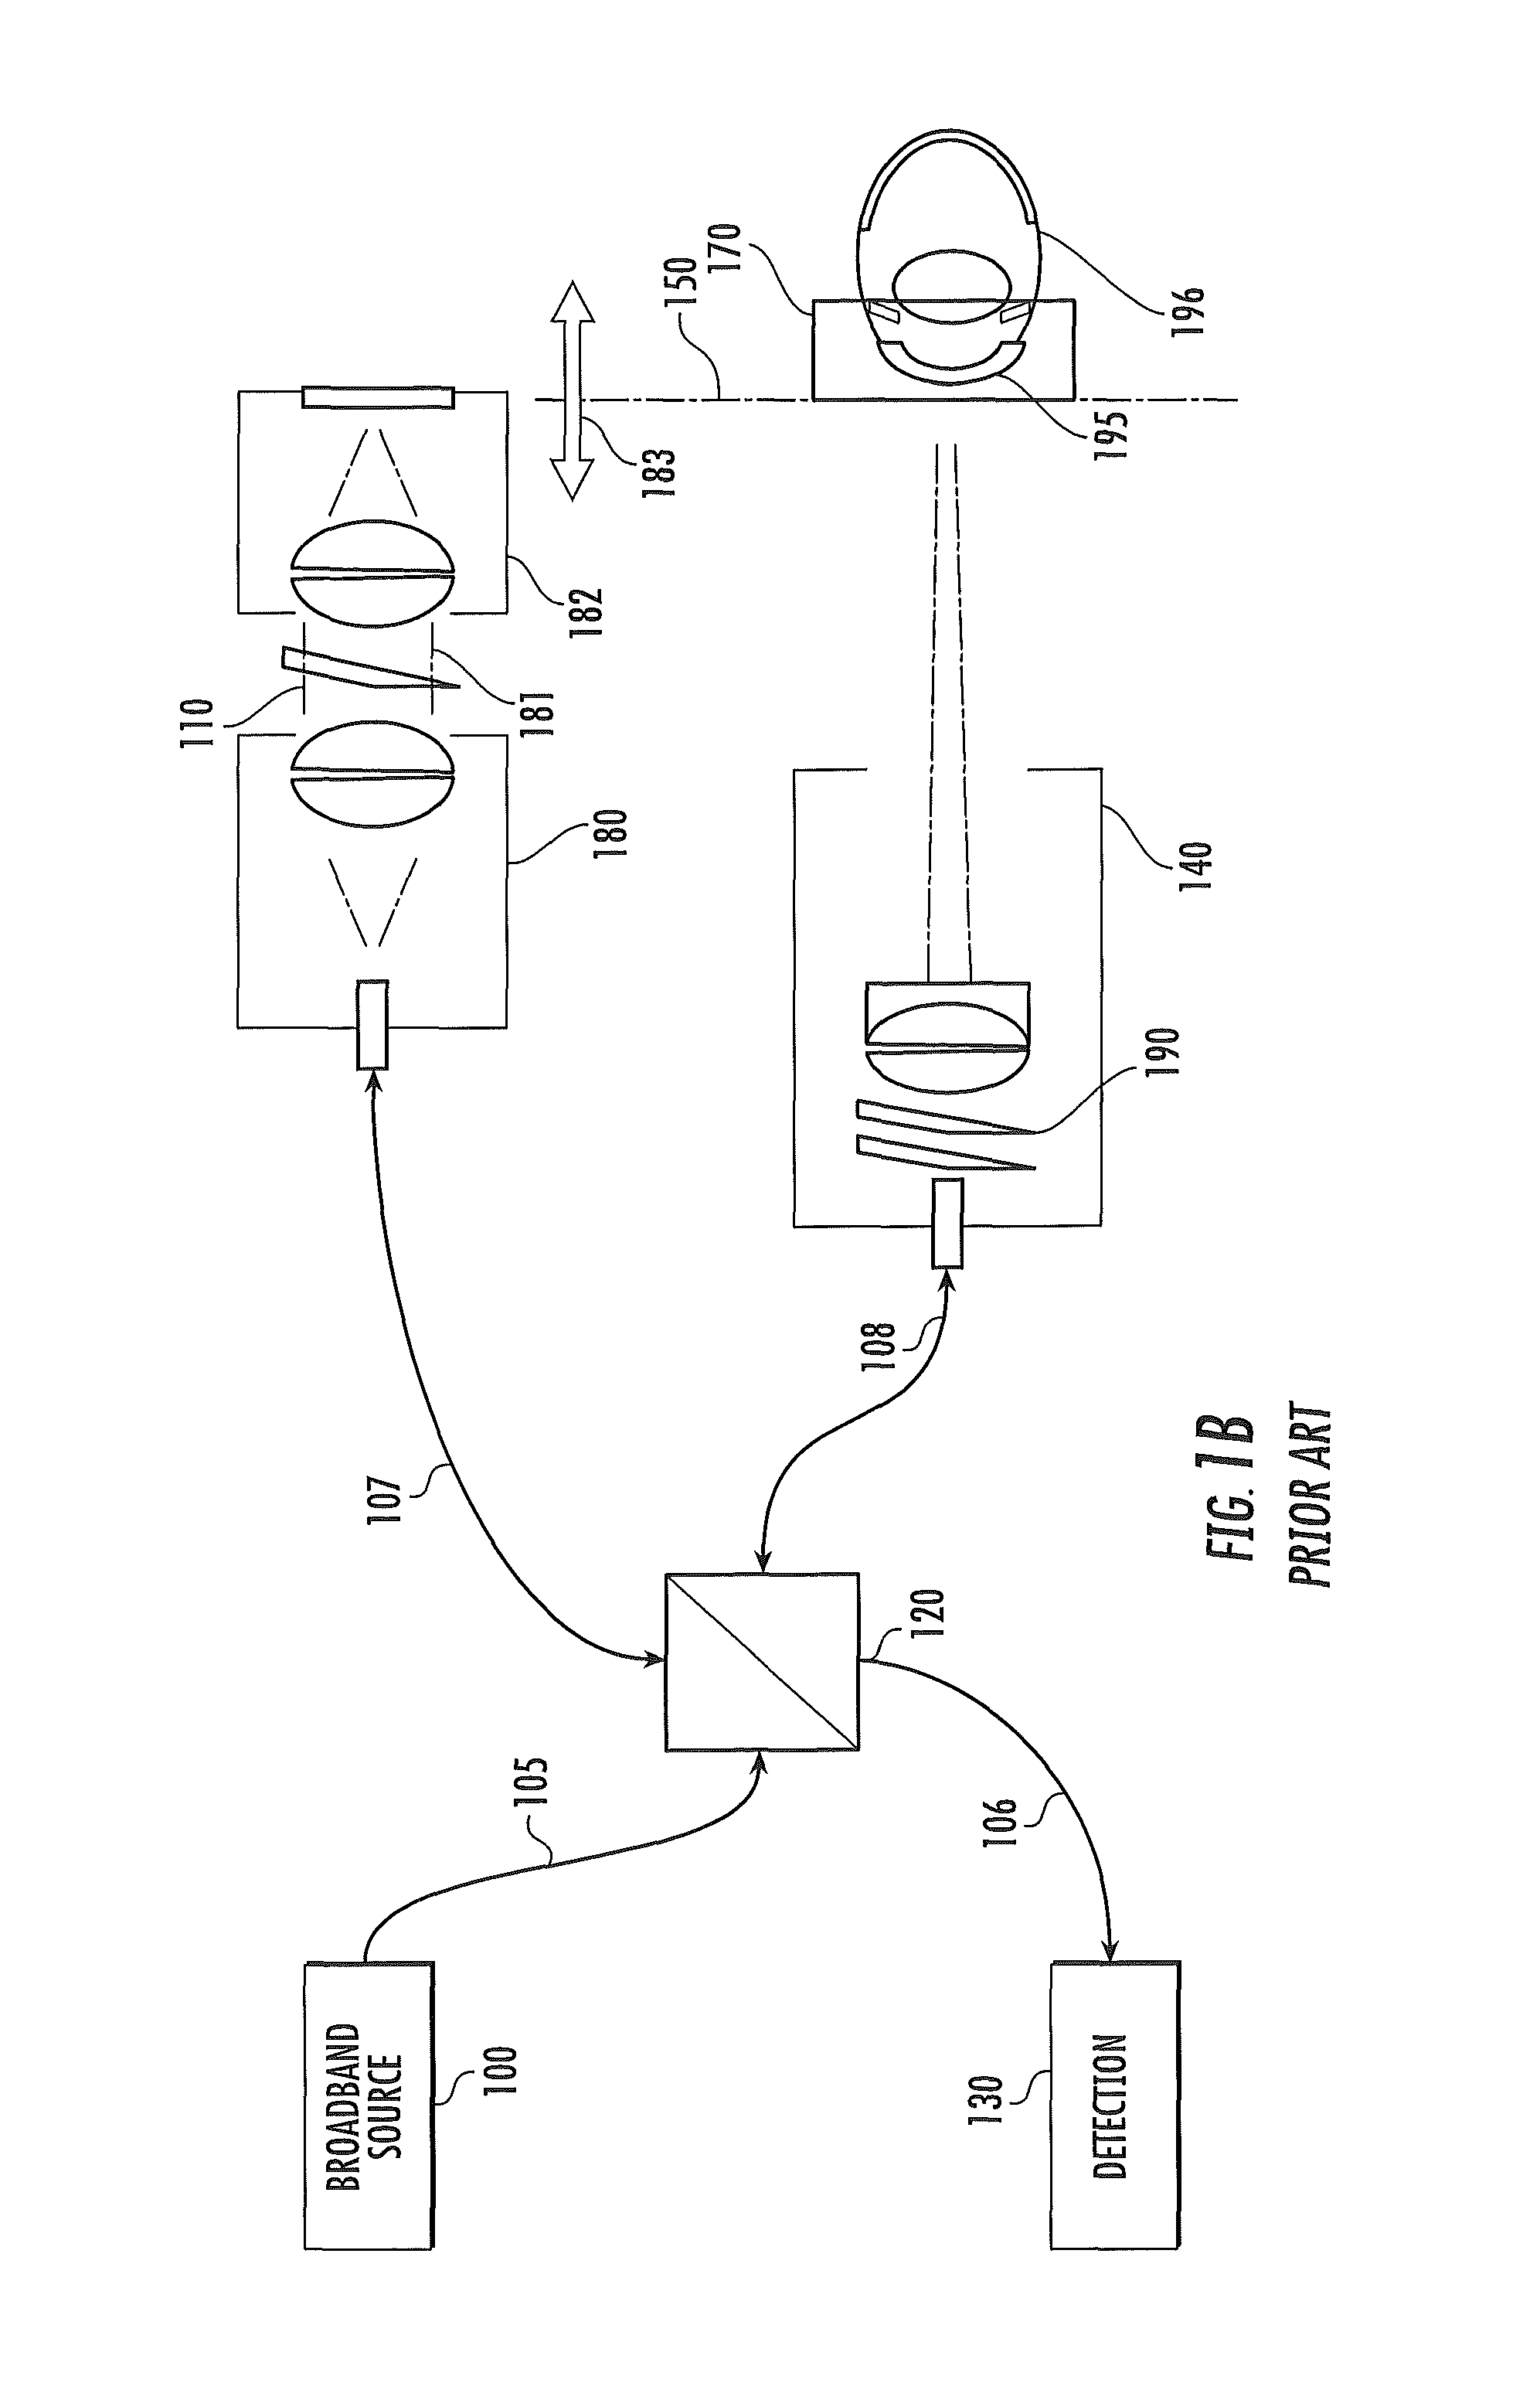 Surgical microscopes using optical coherence tomography and related methods